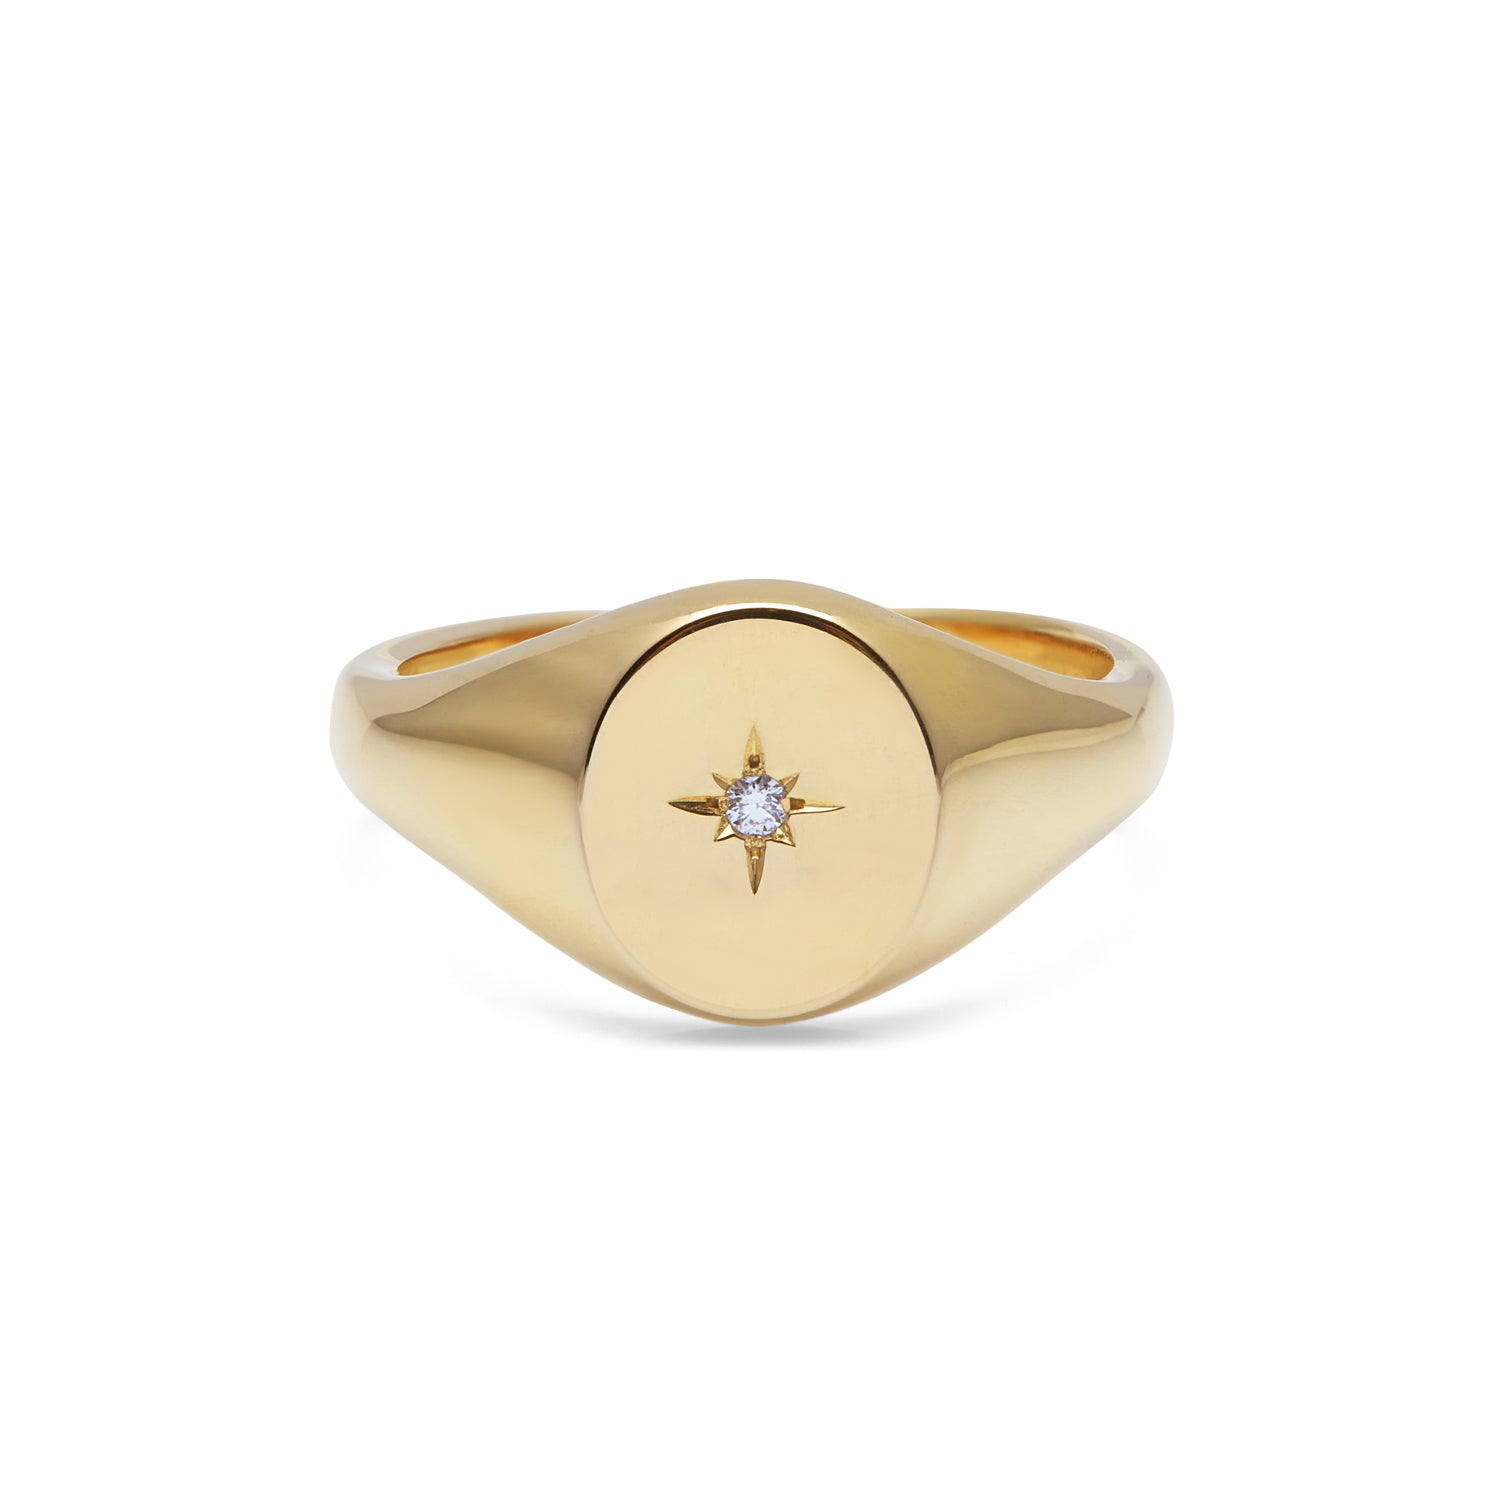 Oval Signet Ring with Star Set Diamond 11x9 - 9K Yellow Gold